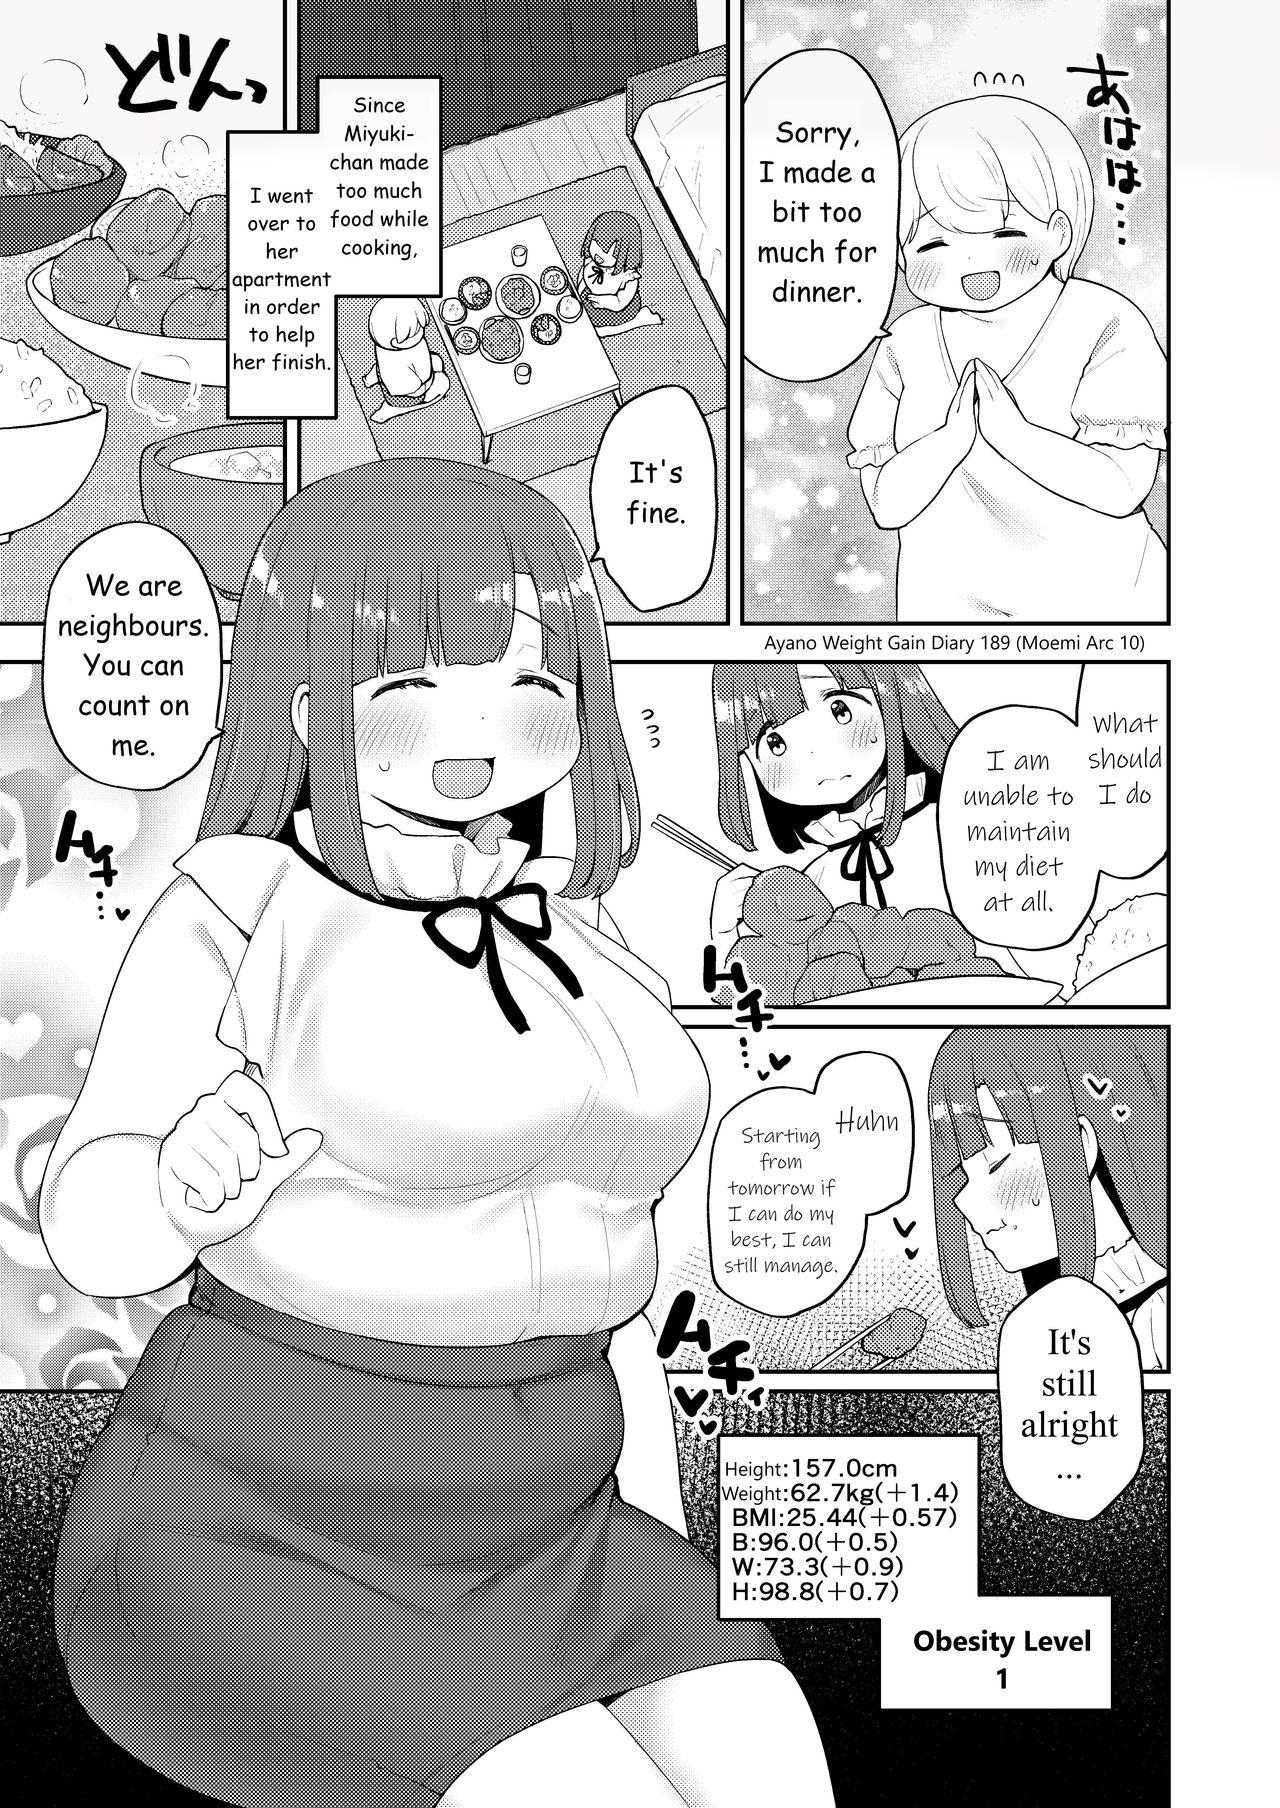 Ink Ayano's Weight Gain Diary Relax - Page 189